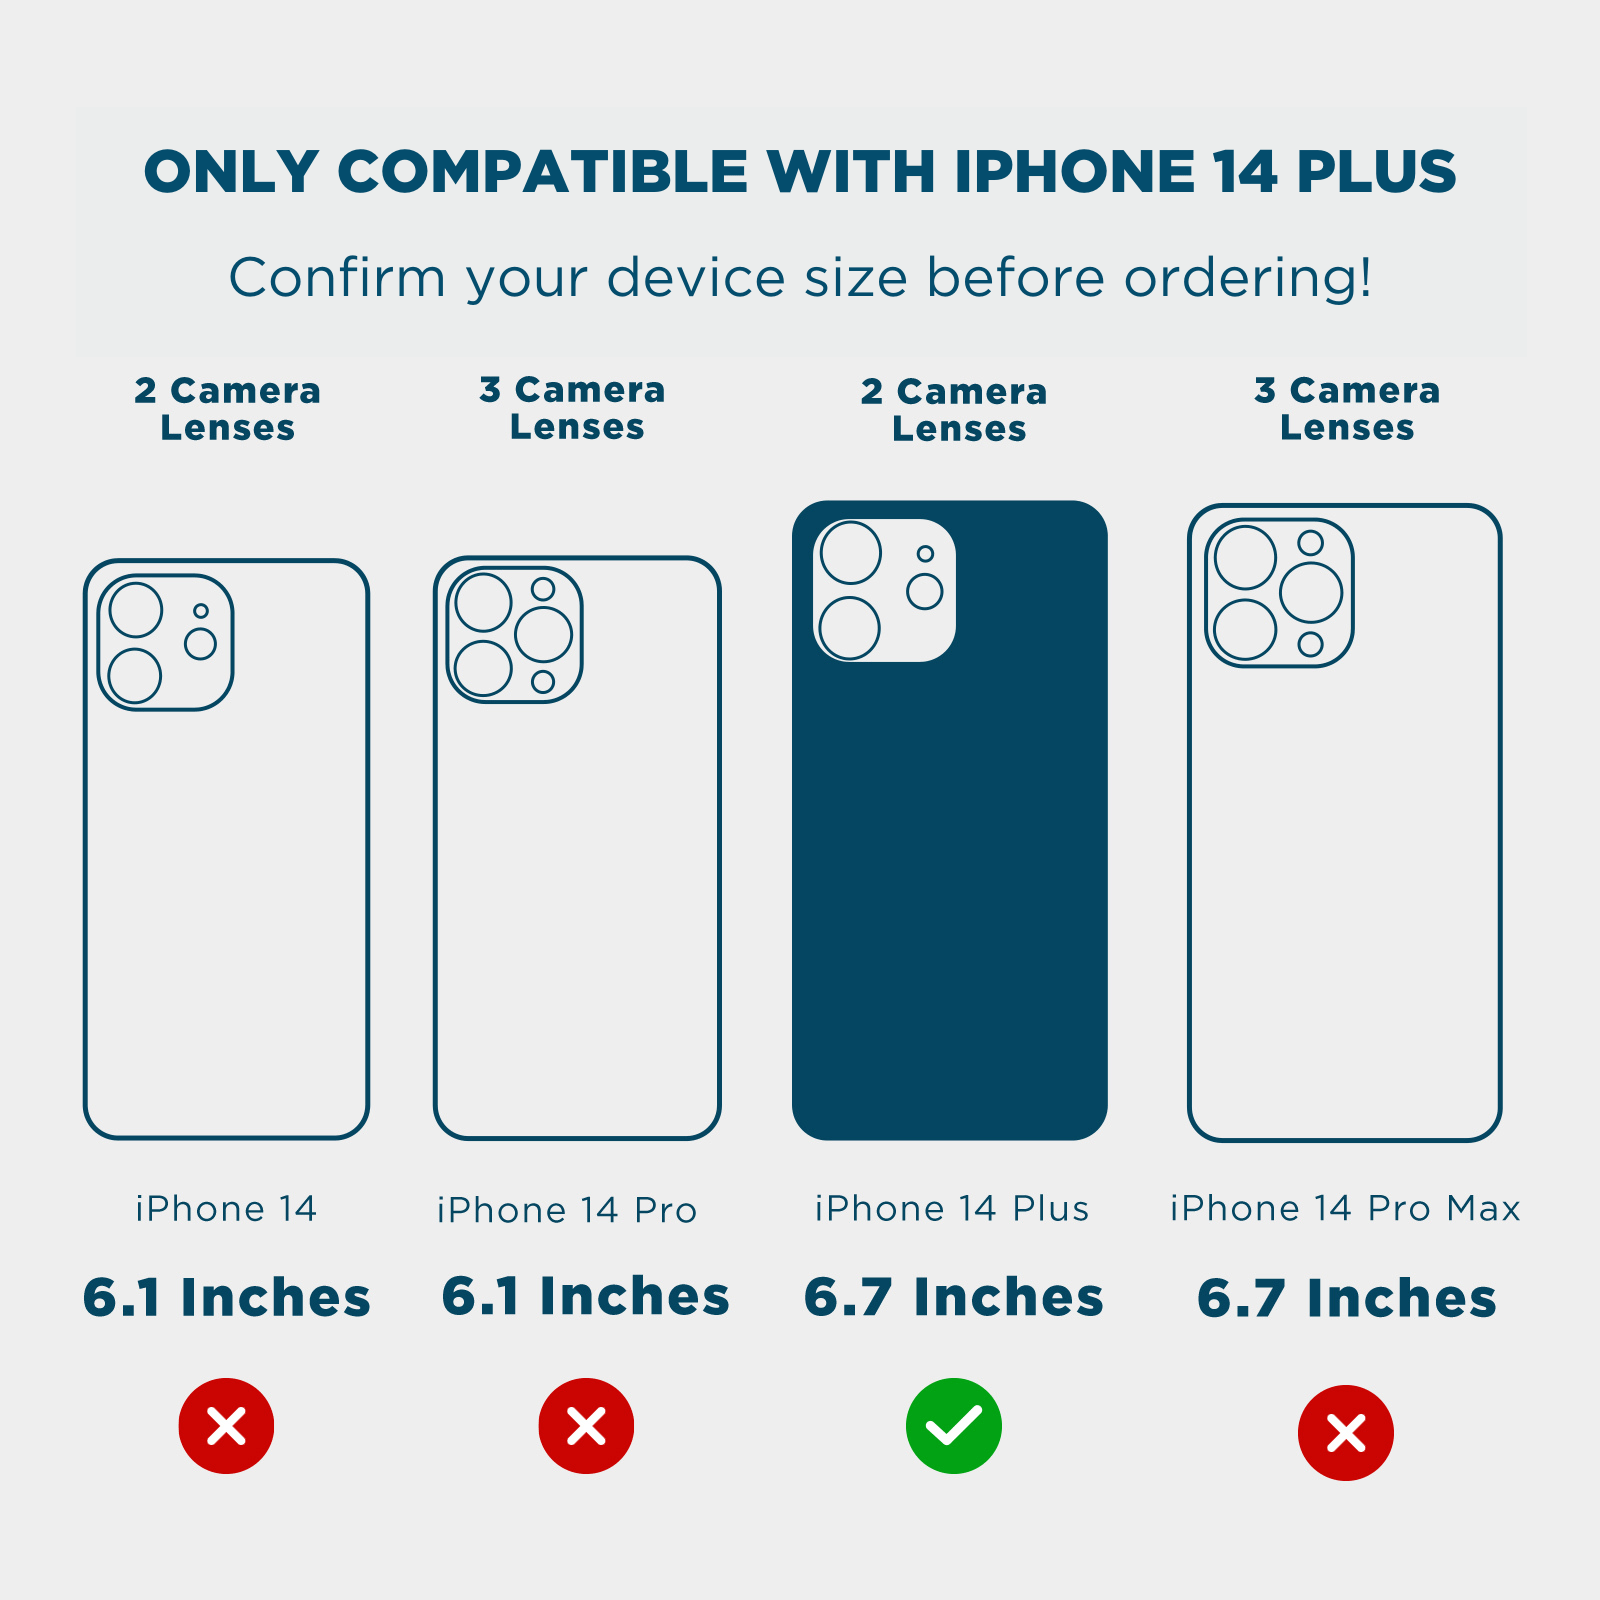 ONLY COMPATIBLE WITH IPHONE 14 PLUS. CONFIRM YOUR DEVICE SIZE BEFORE ORDERING! 2 CAMERA LENSES, 3 CAMERA LENSES, 2 CAMERA LENSES, 3 CAMERA LENSES, 6.1 INCHEC, 6.1 INCHES, 6.7 INCHES, 6.7 INCHES. COLOR::NEON YELLOW